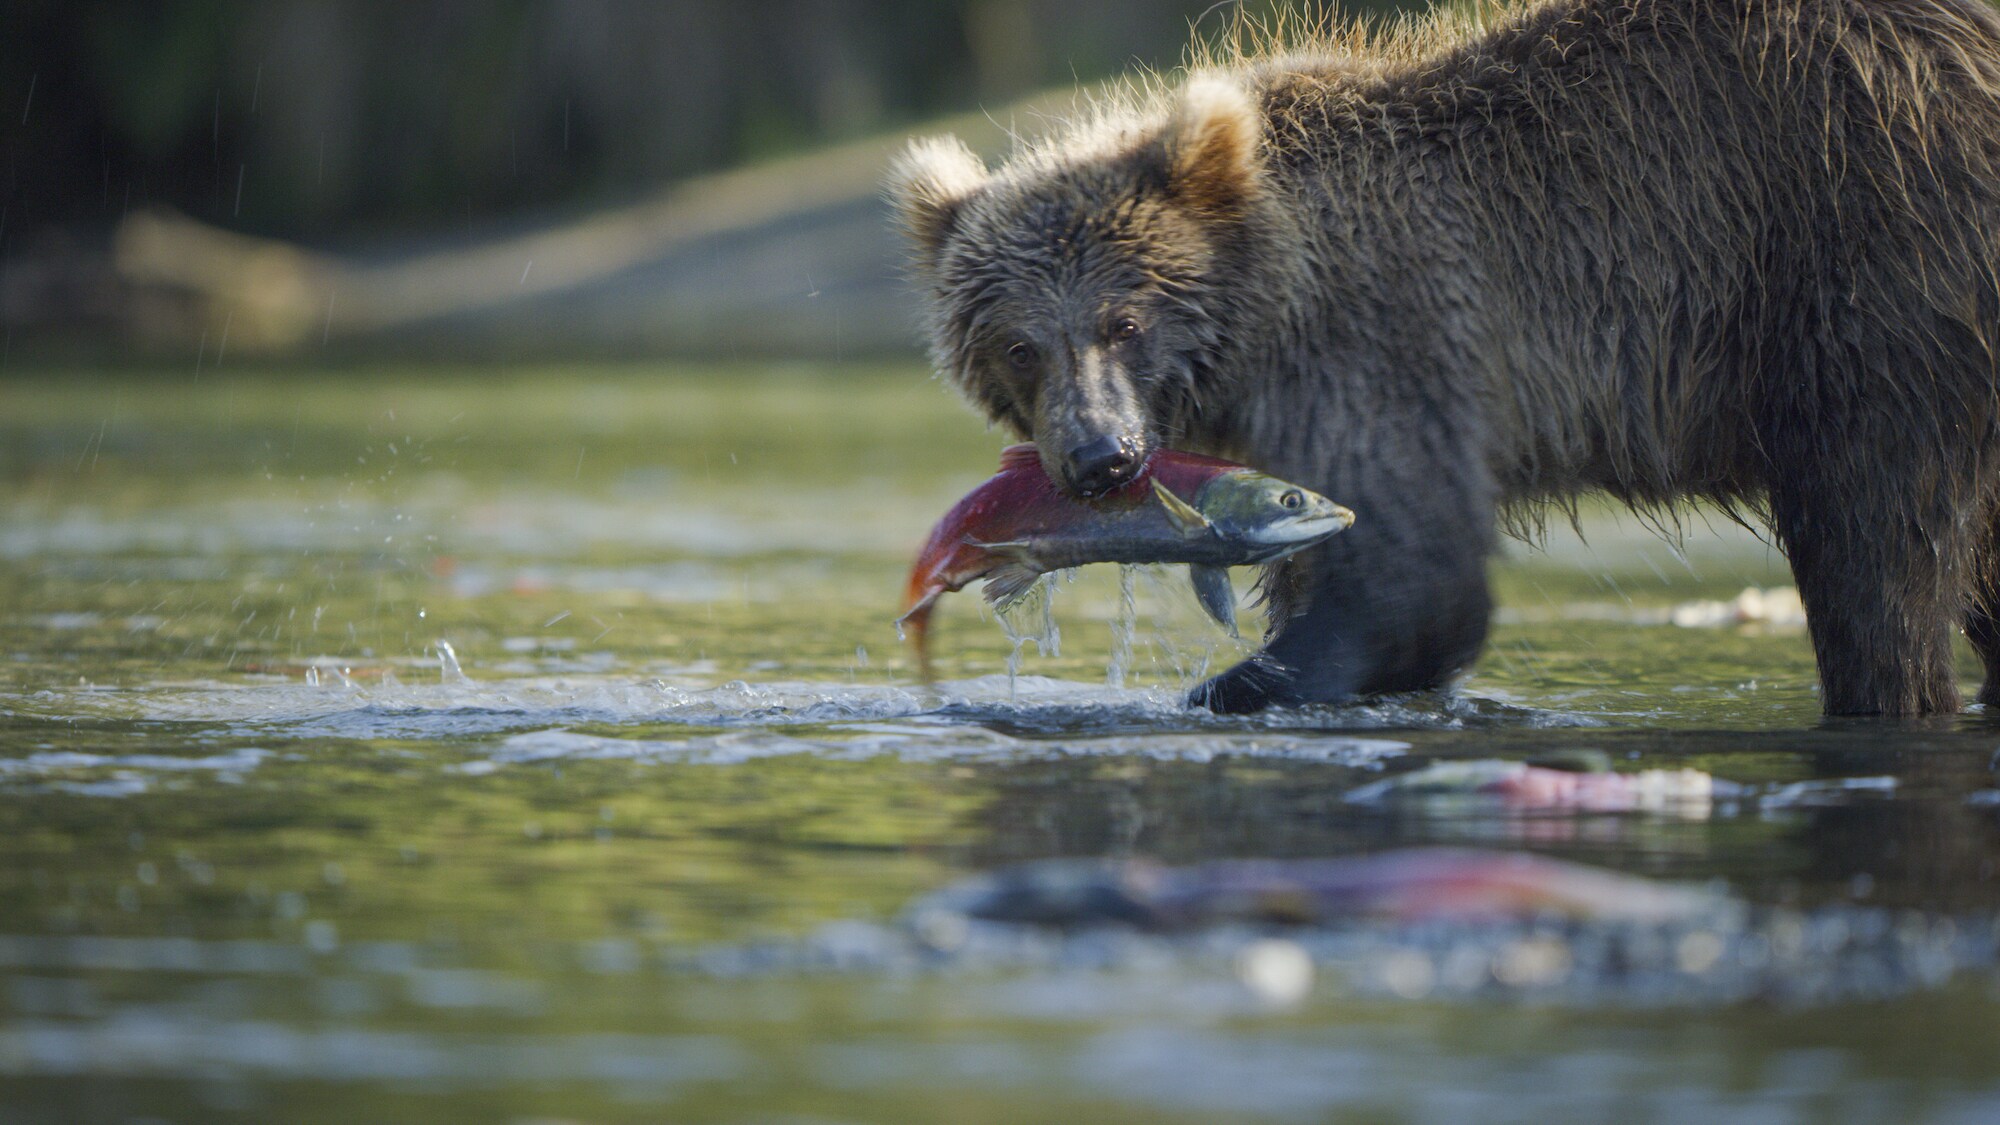 A young bear catches a salmon during spawning in Lake Iliamna, Alaska. (National Geographic for Disney+)